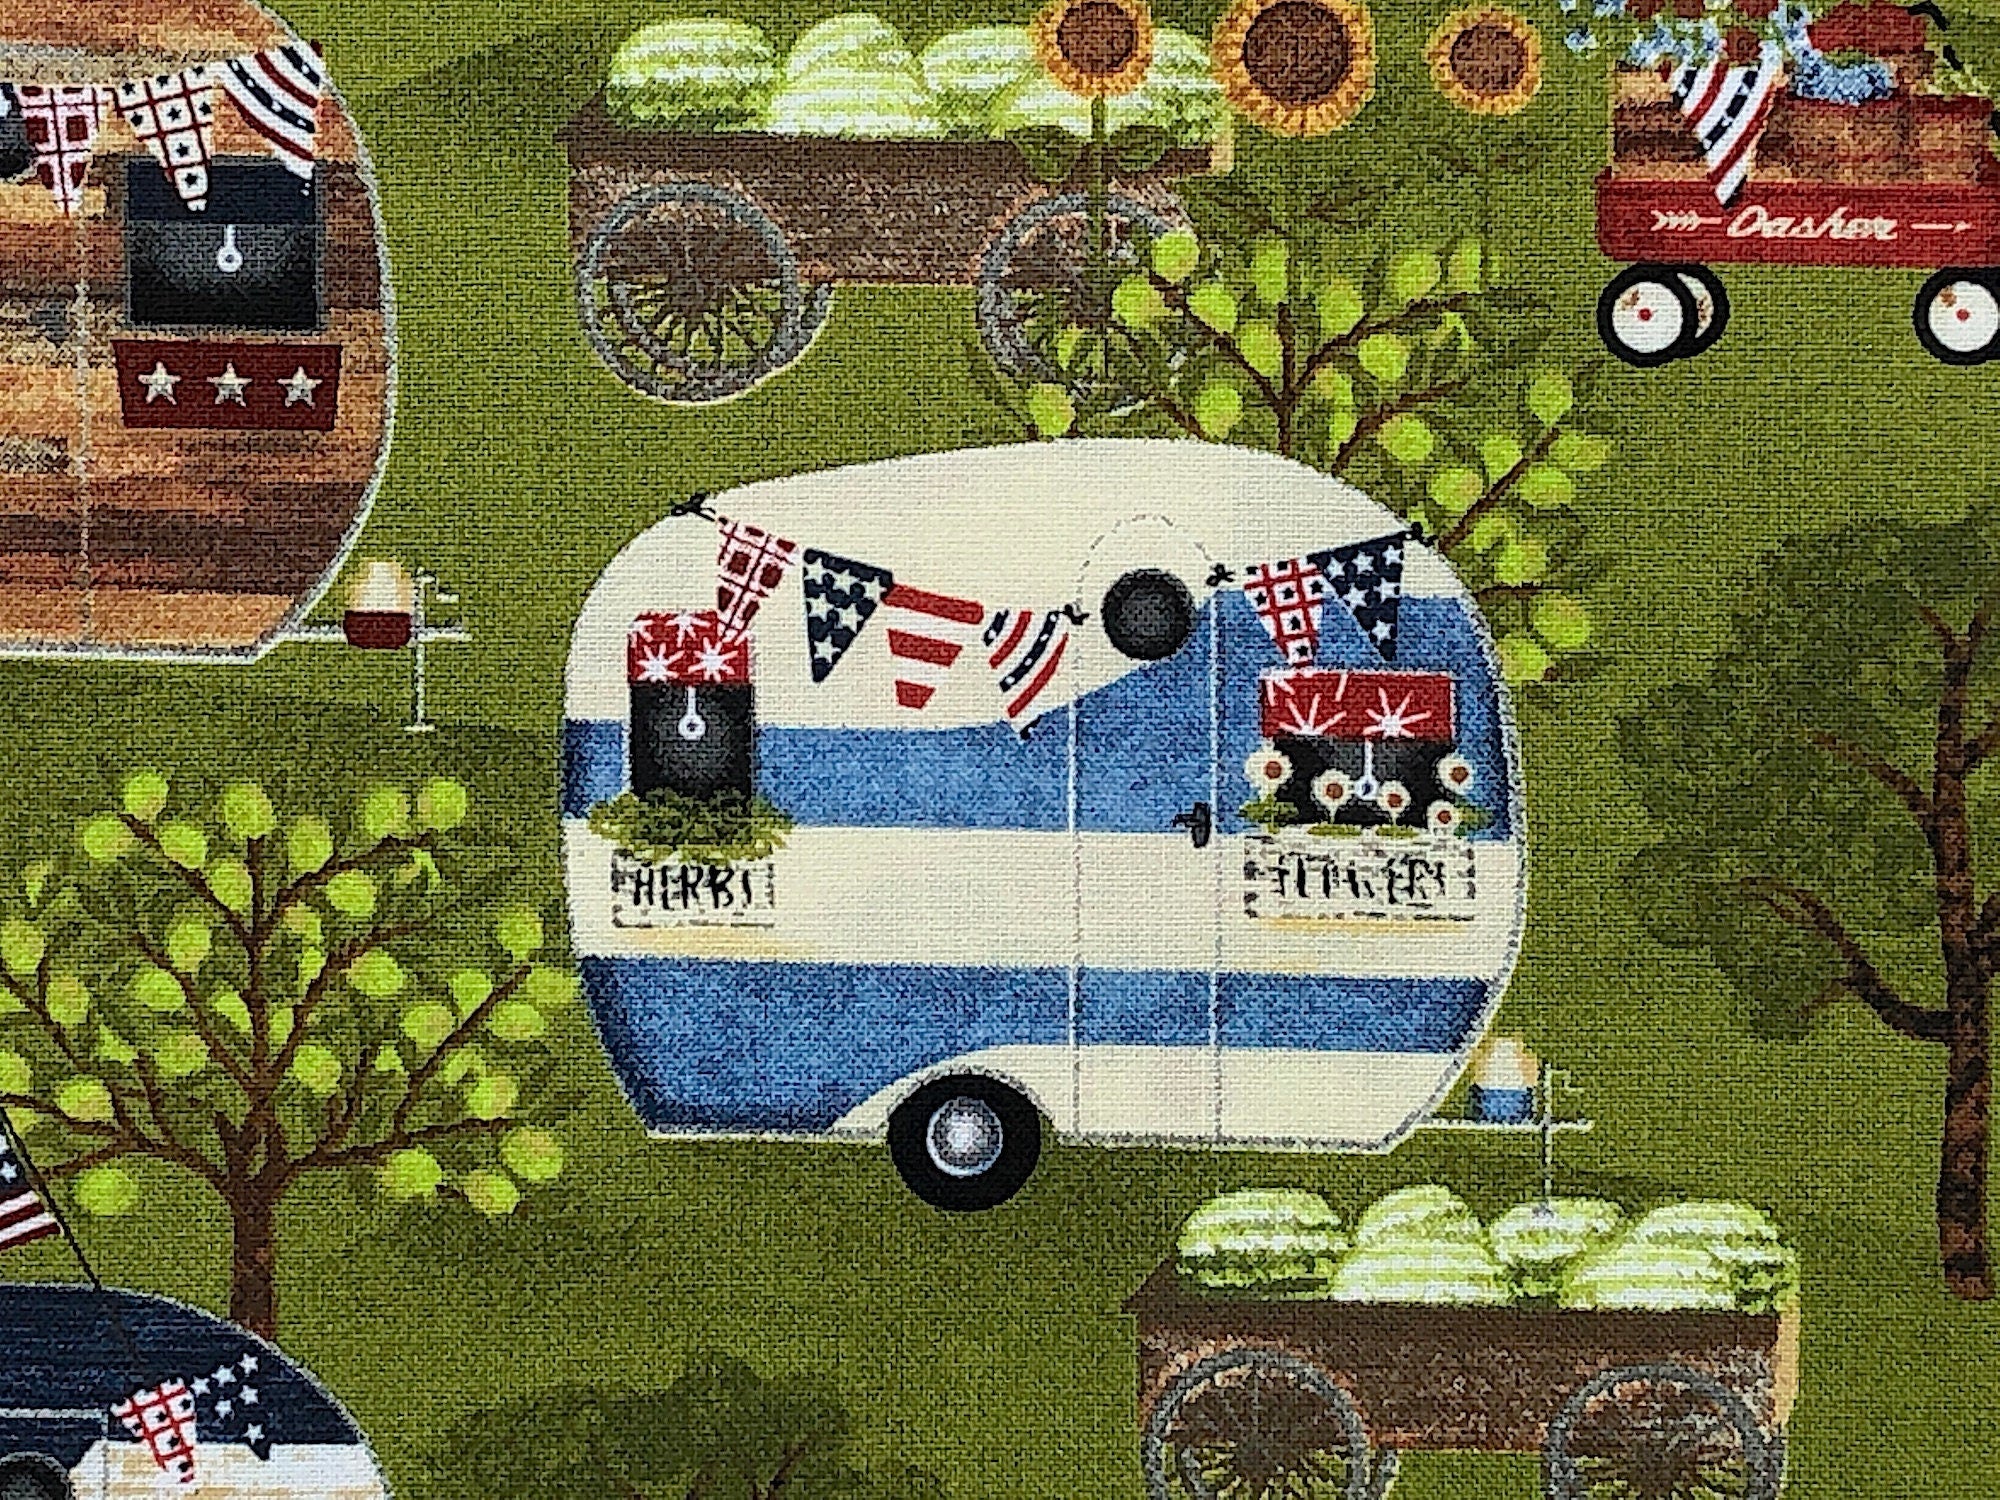 Close up of a travel trailer with red white and blue flags on it.